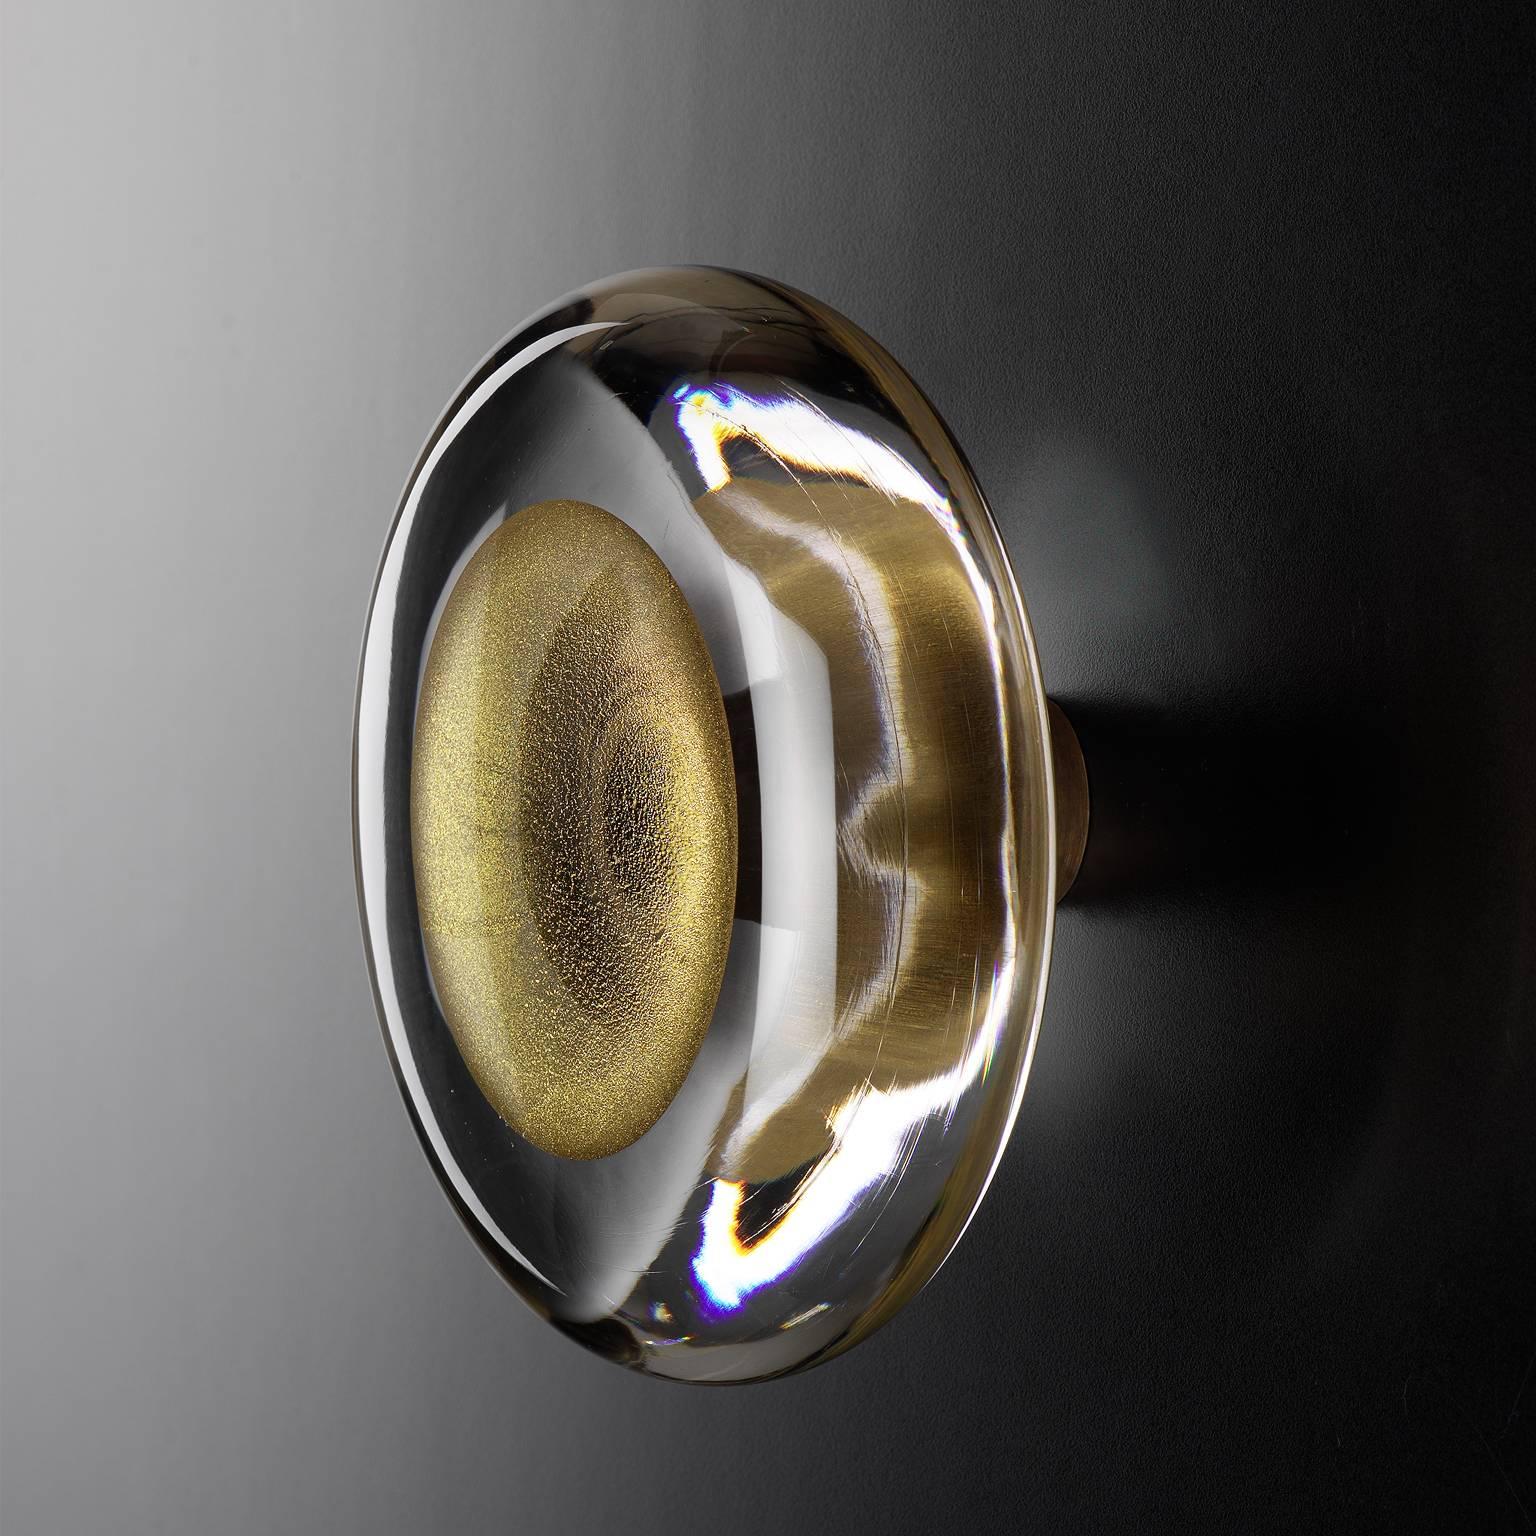 Bitta Murano glass door handle by Seguso Vetri d'Arte. Handmade, blown Murano glass in an elegant, modern shape. The round door handle has a gold glass center encircled by thick transparent glass, giving solid depth to the door handle. A unique and